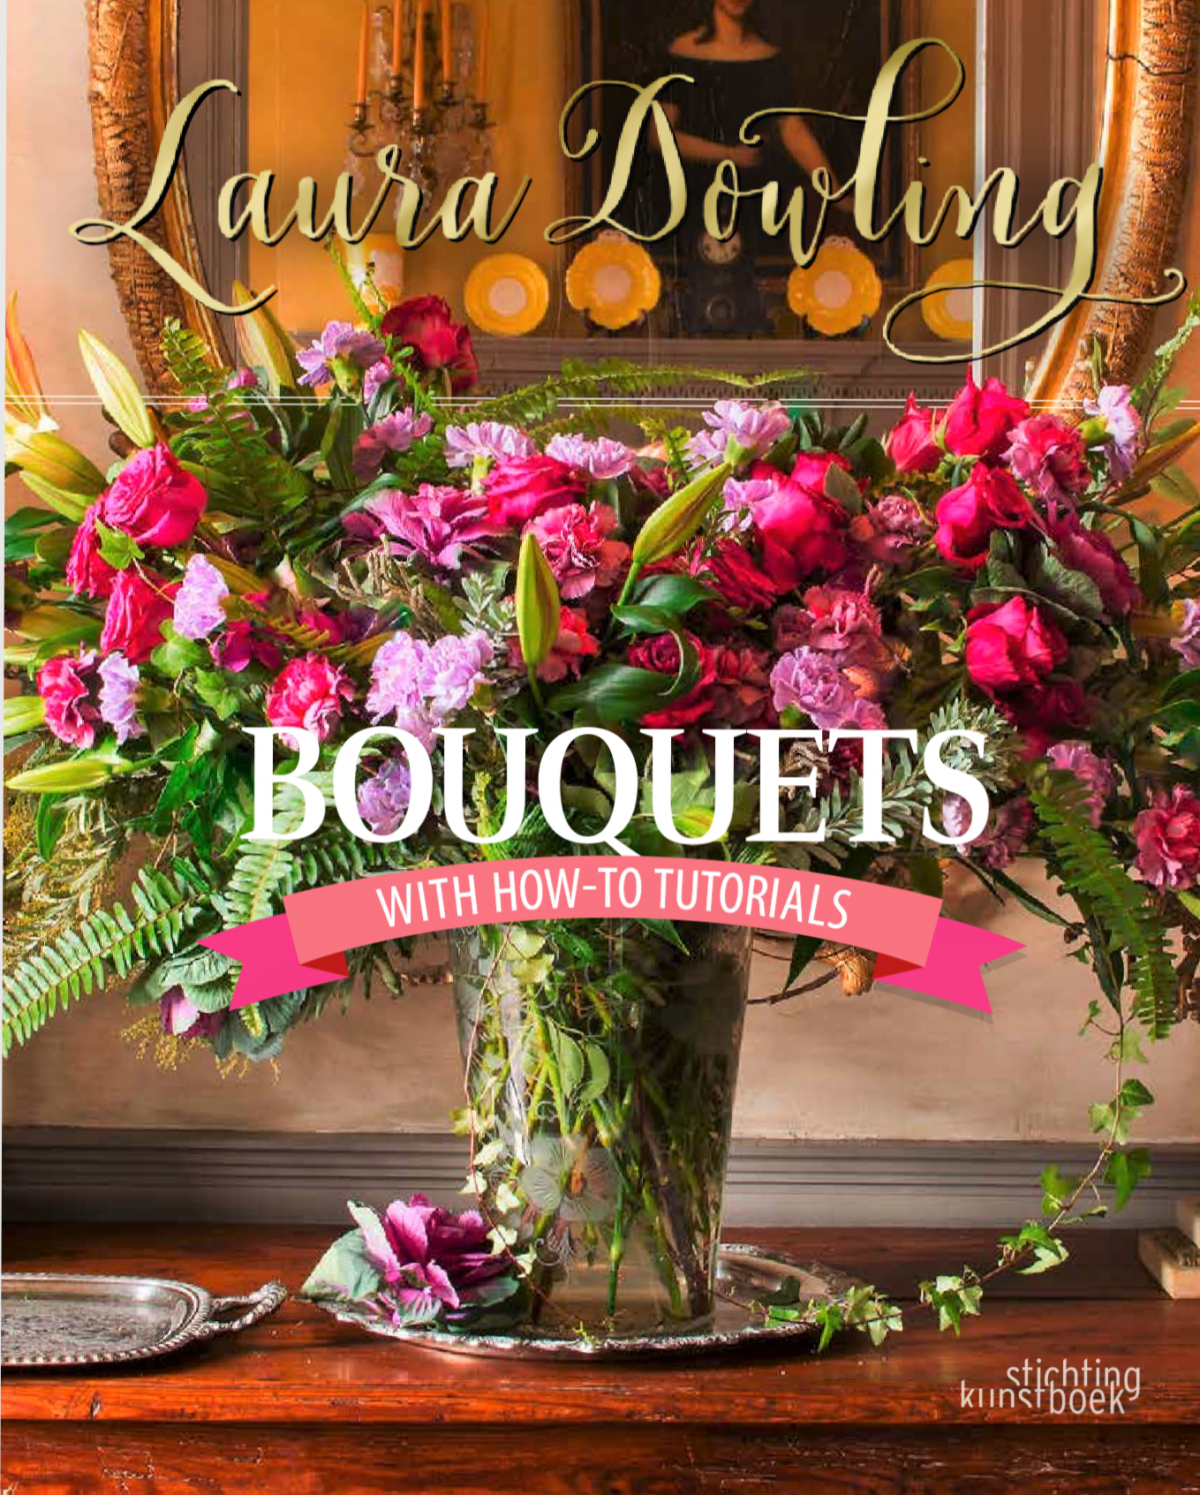 Book cover for Bouquets, by Laura Dowling. Subtitle: with How-To Tutorials